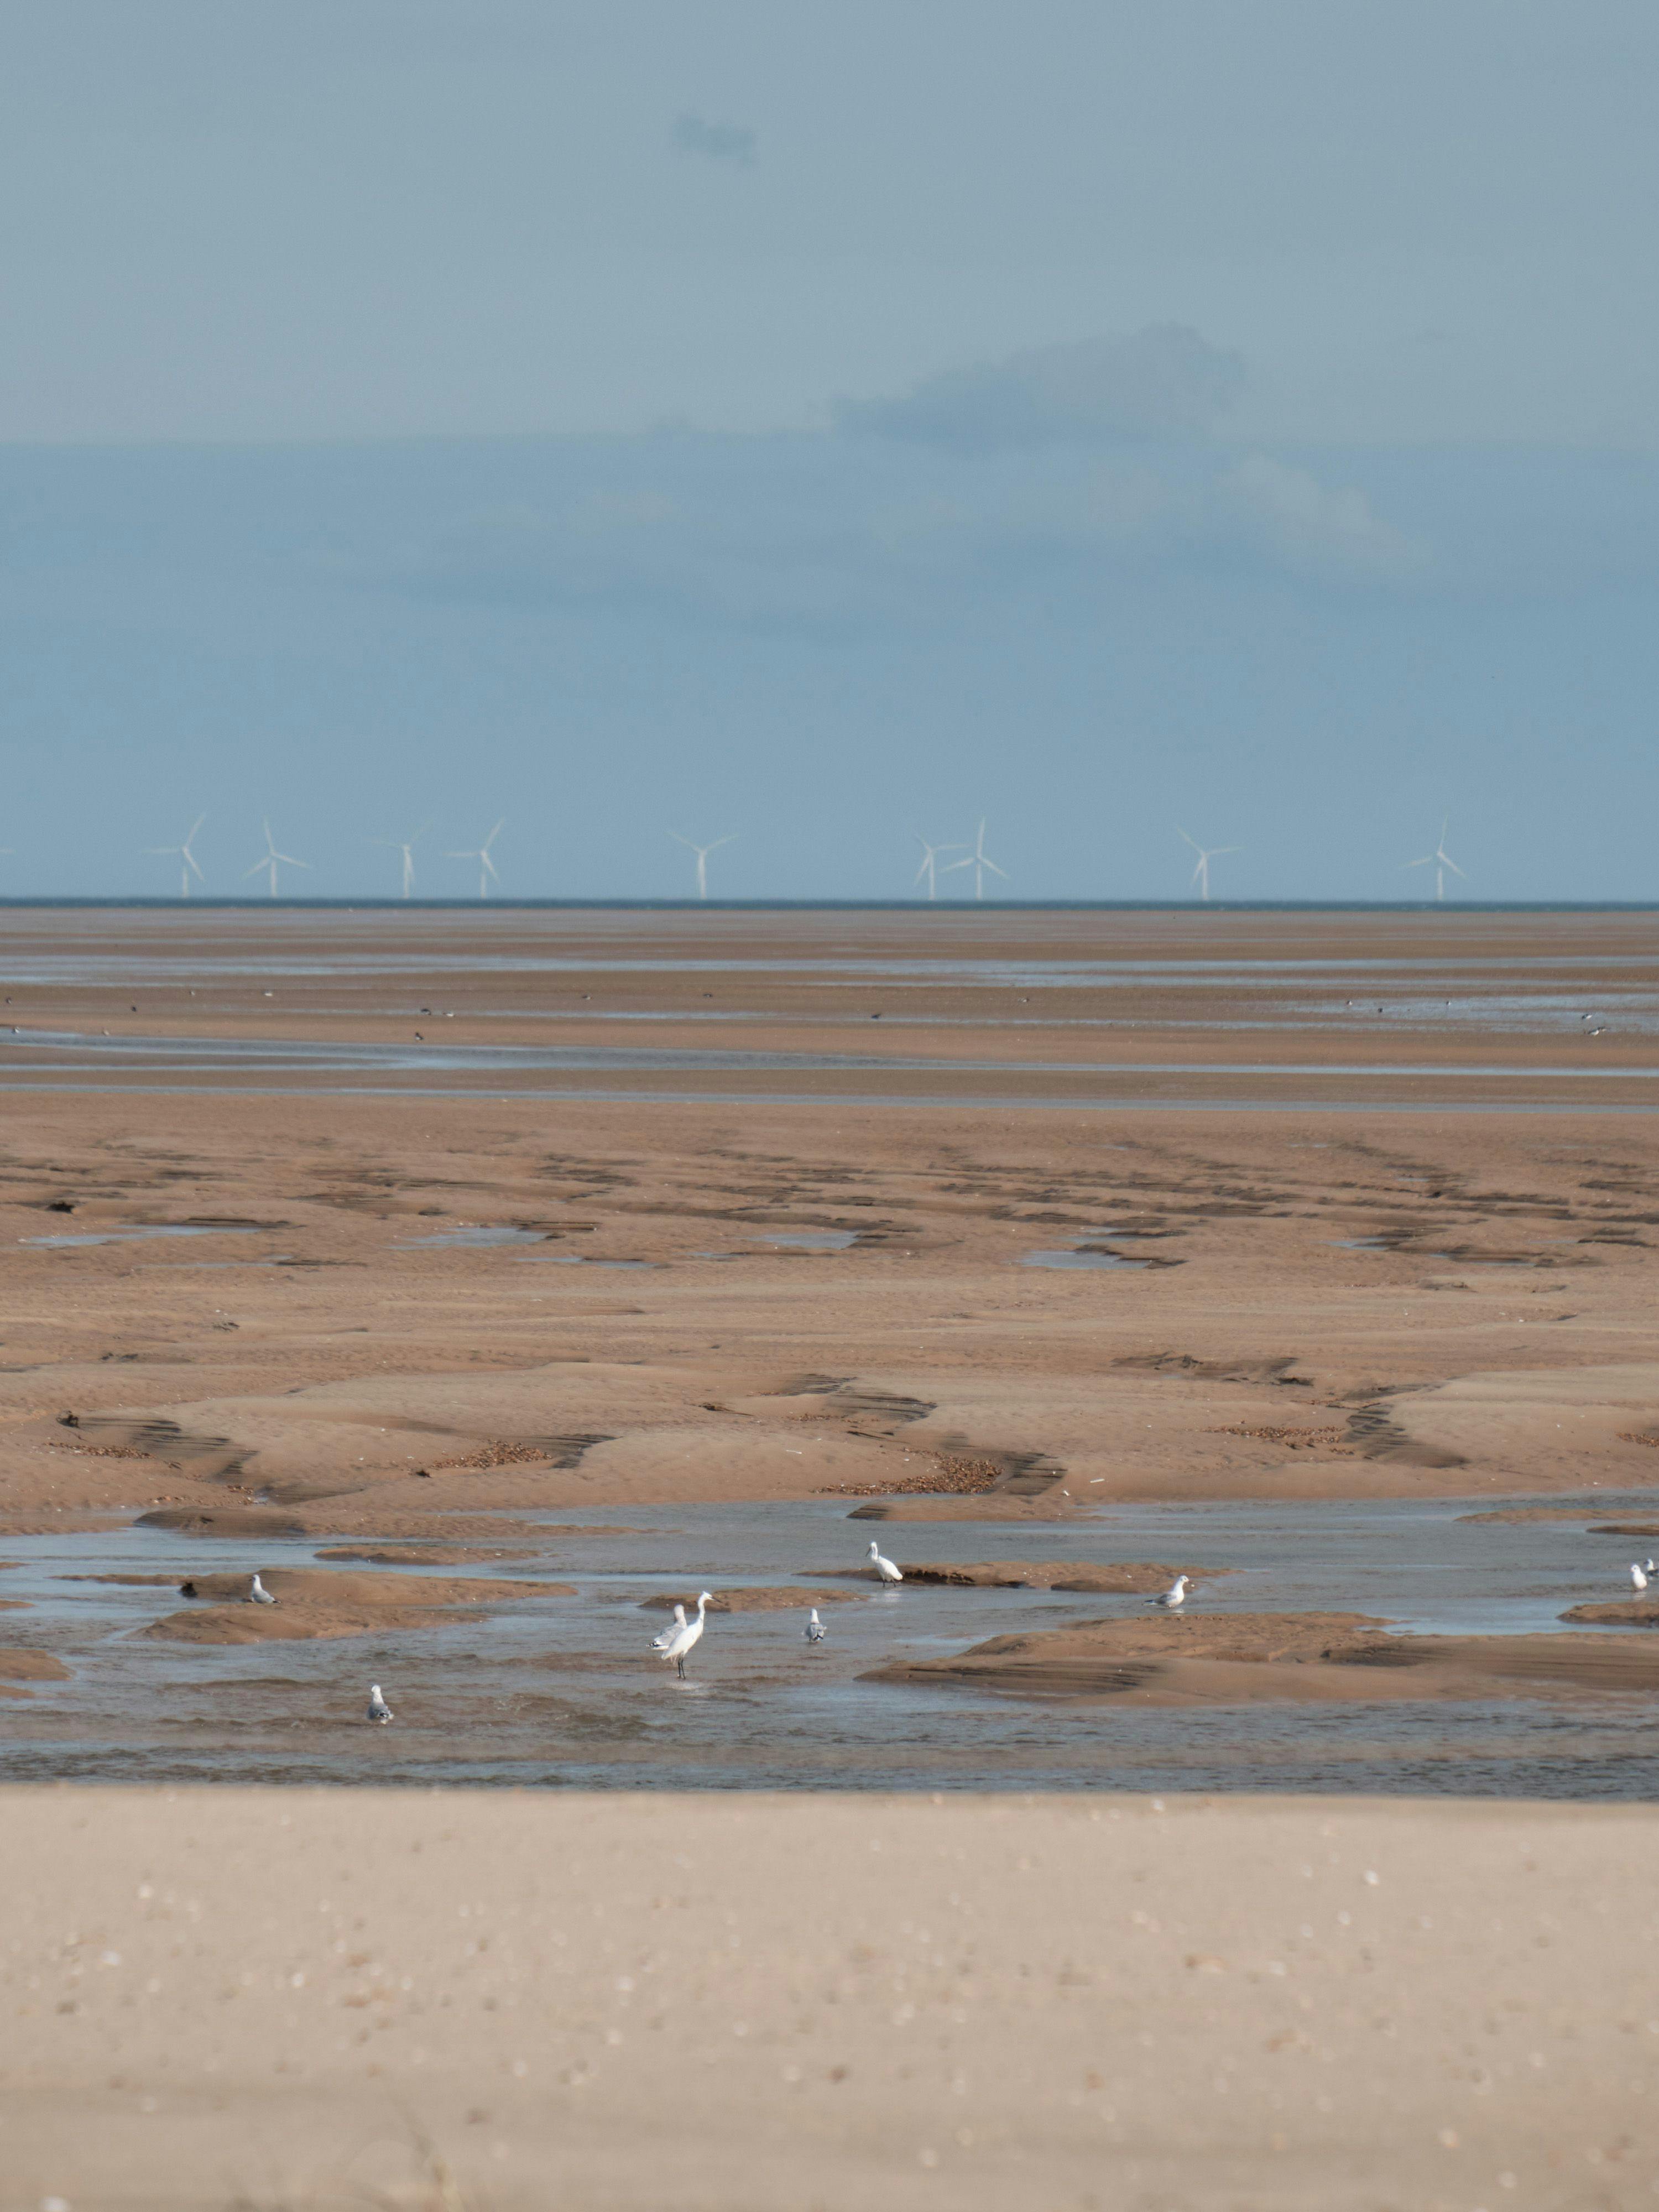 Several types of sea birds rest and eat in the sand. To the distance a wind-farm is visible on the horizon.